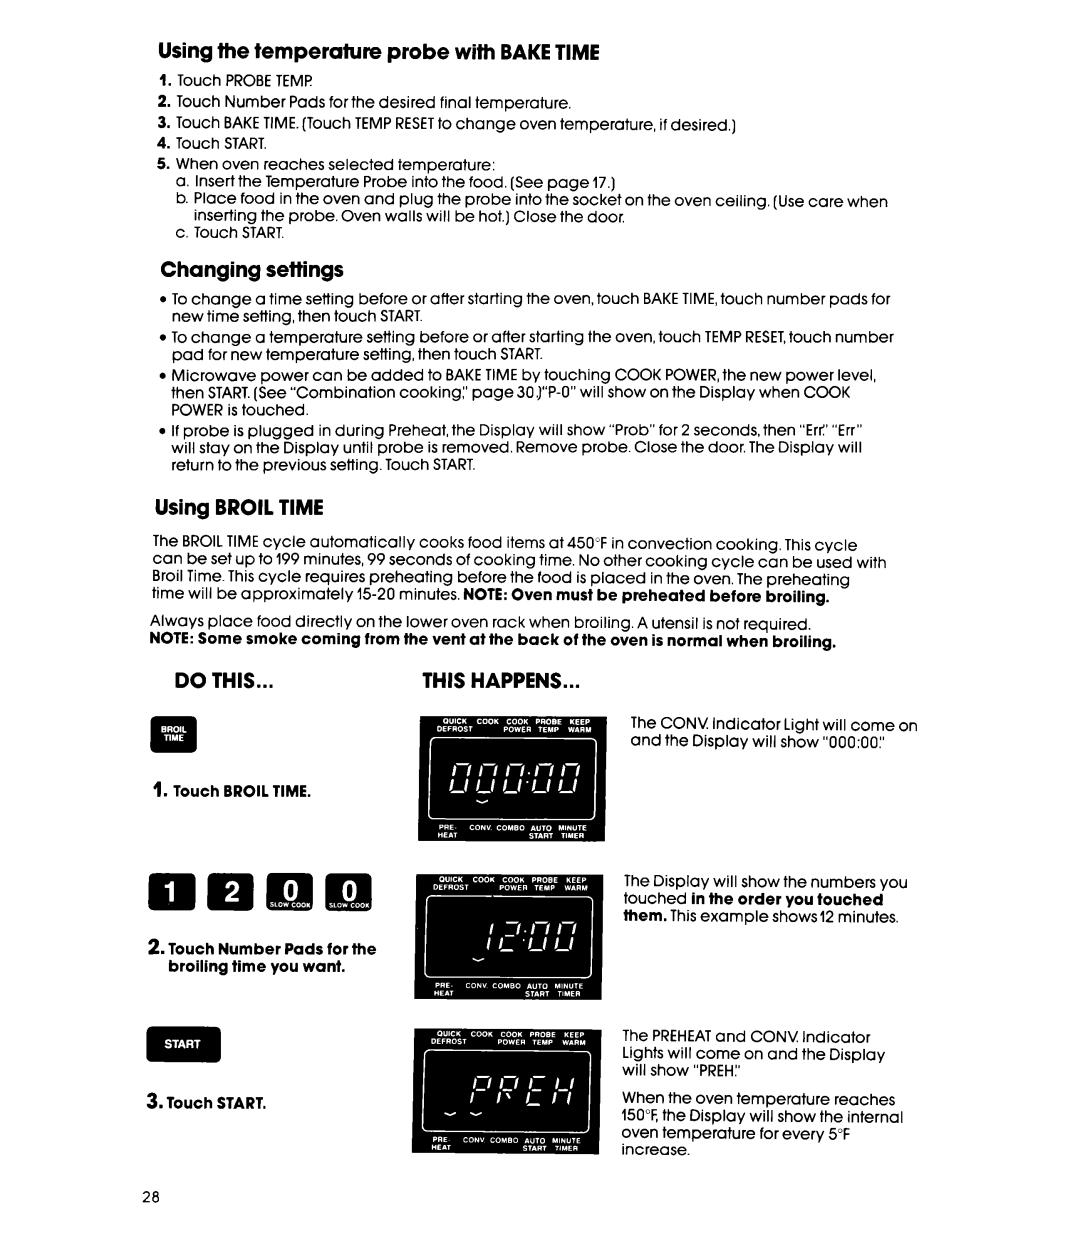 Whirlpool MC8991XT manual Using the temperature probe with BAKE TIME, Changing settings, Broil Time, Do This, This Happens 